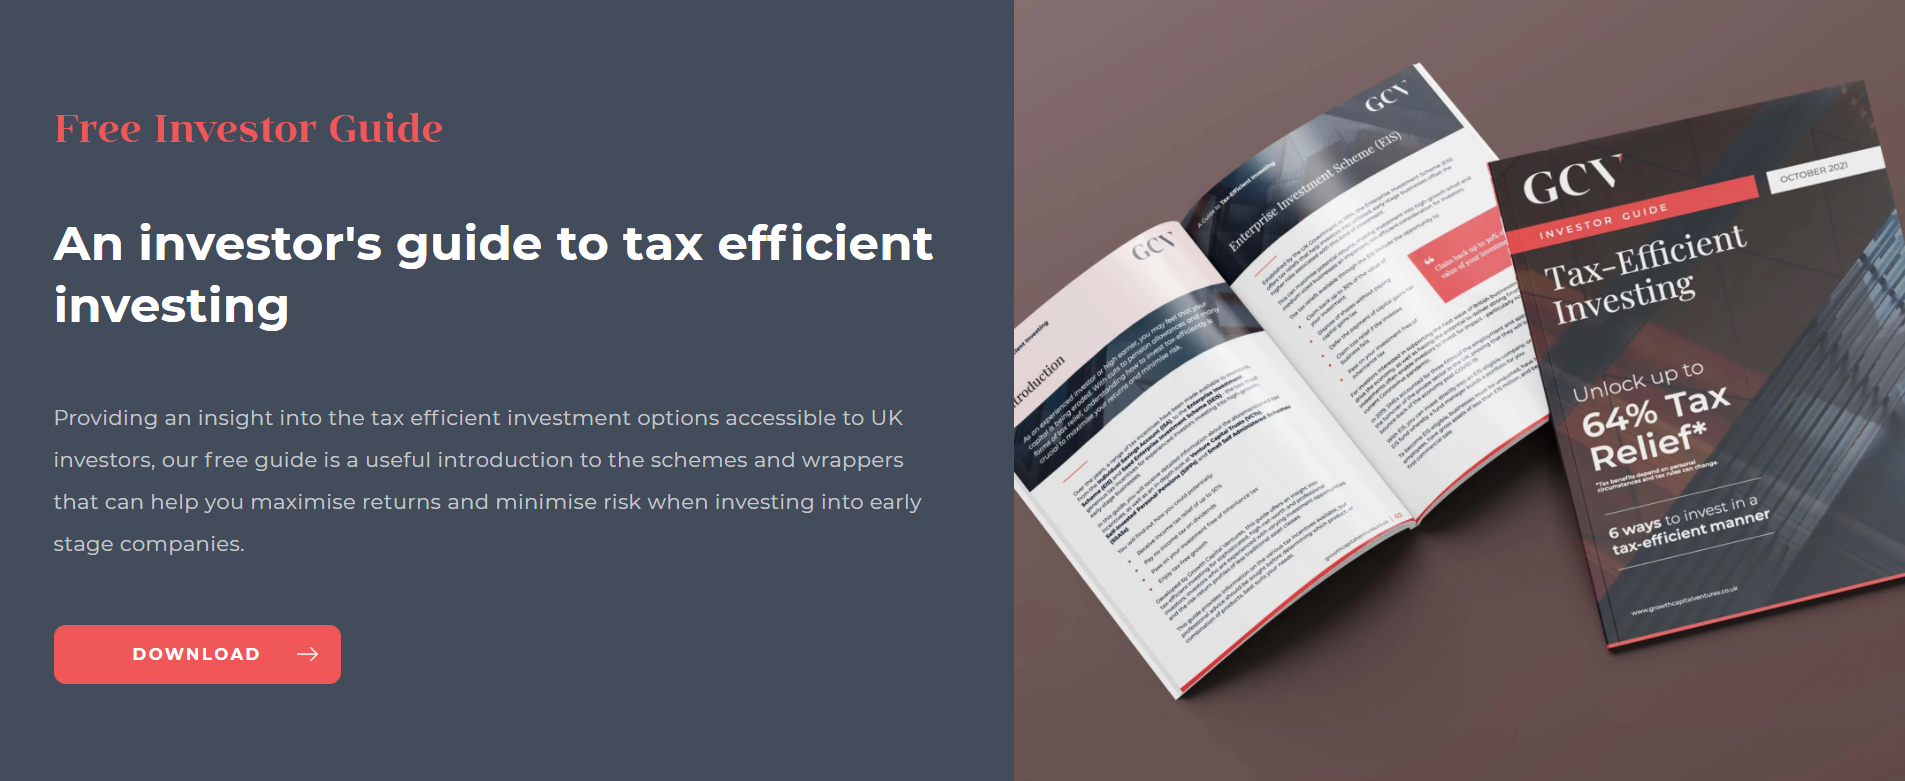 Investors Guide to Tax Efficient Investing